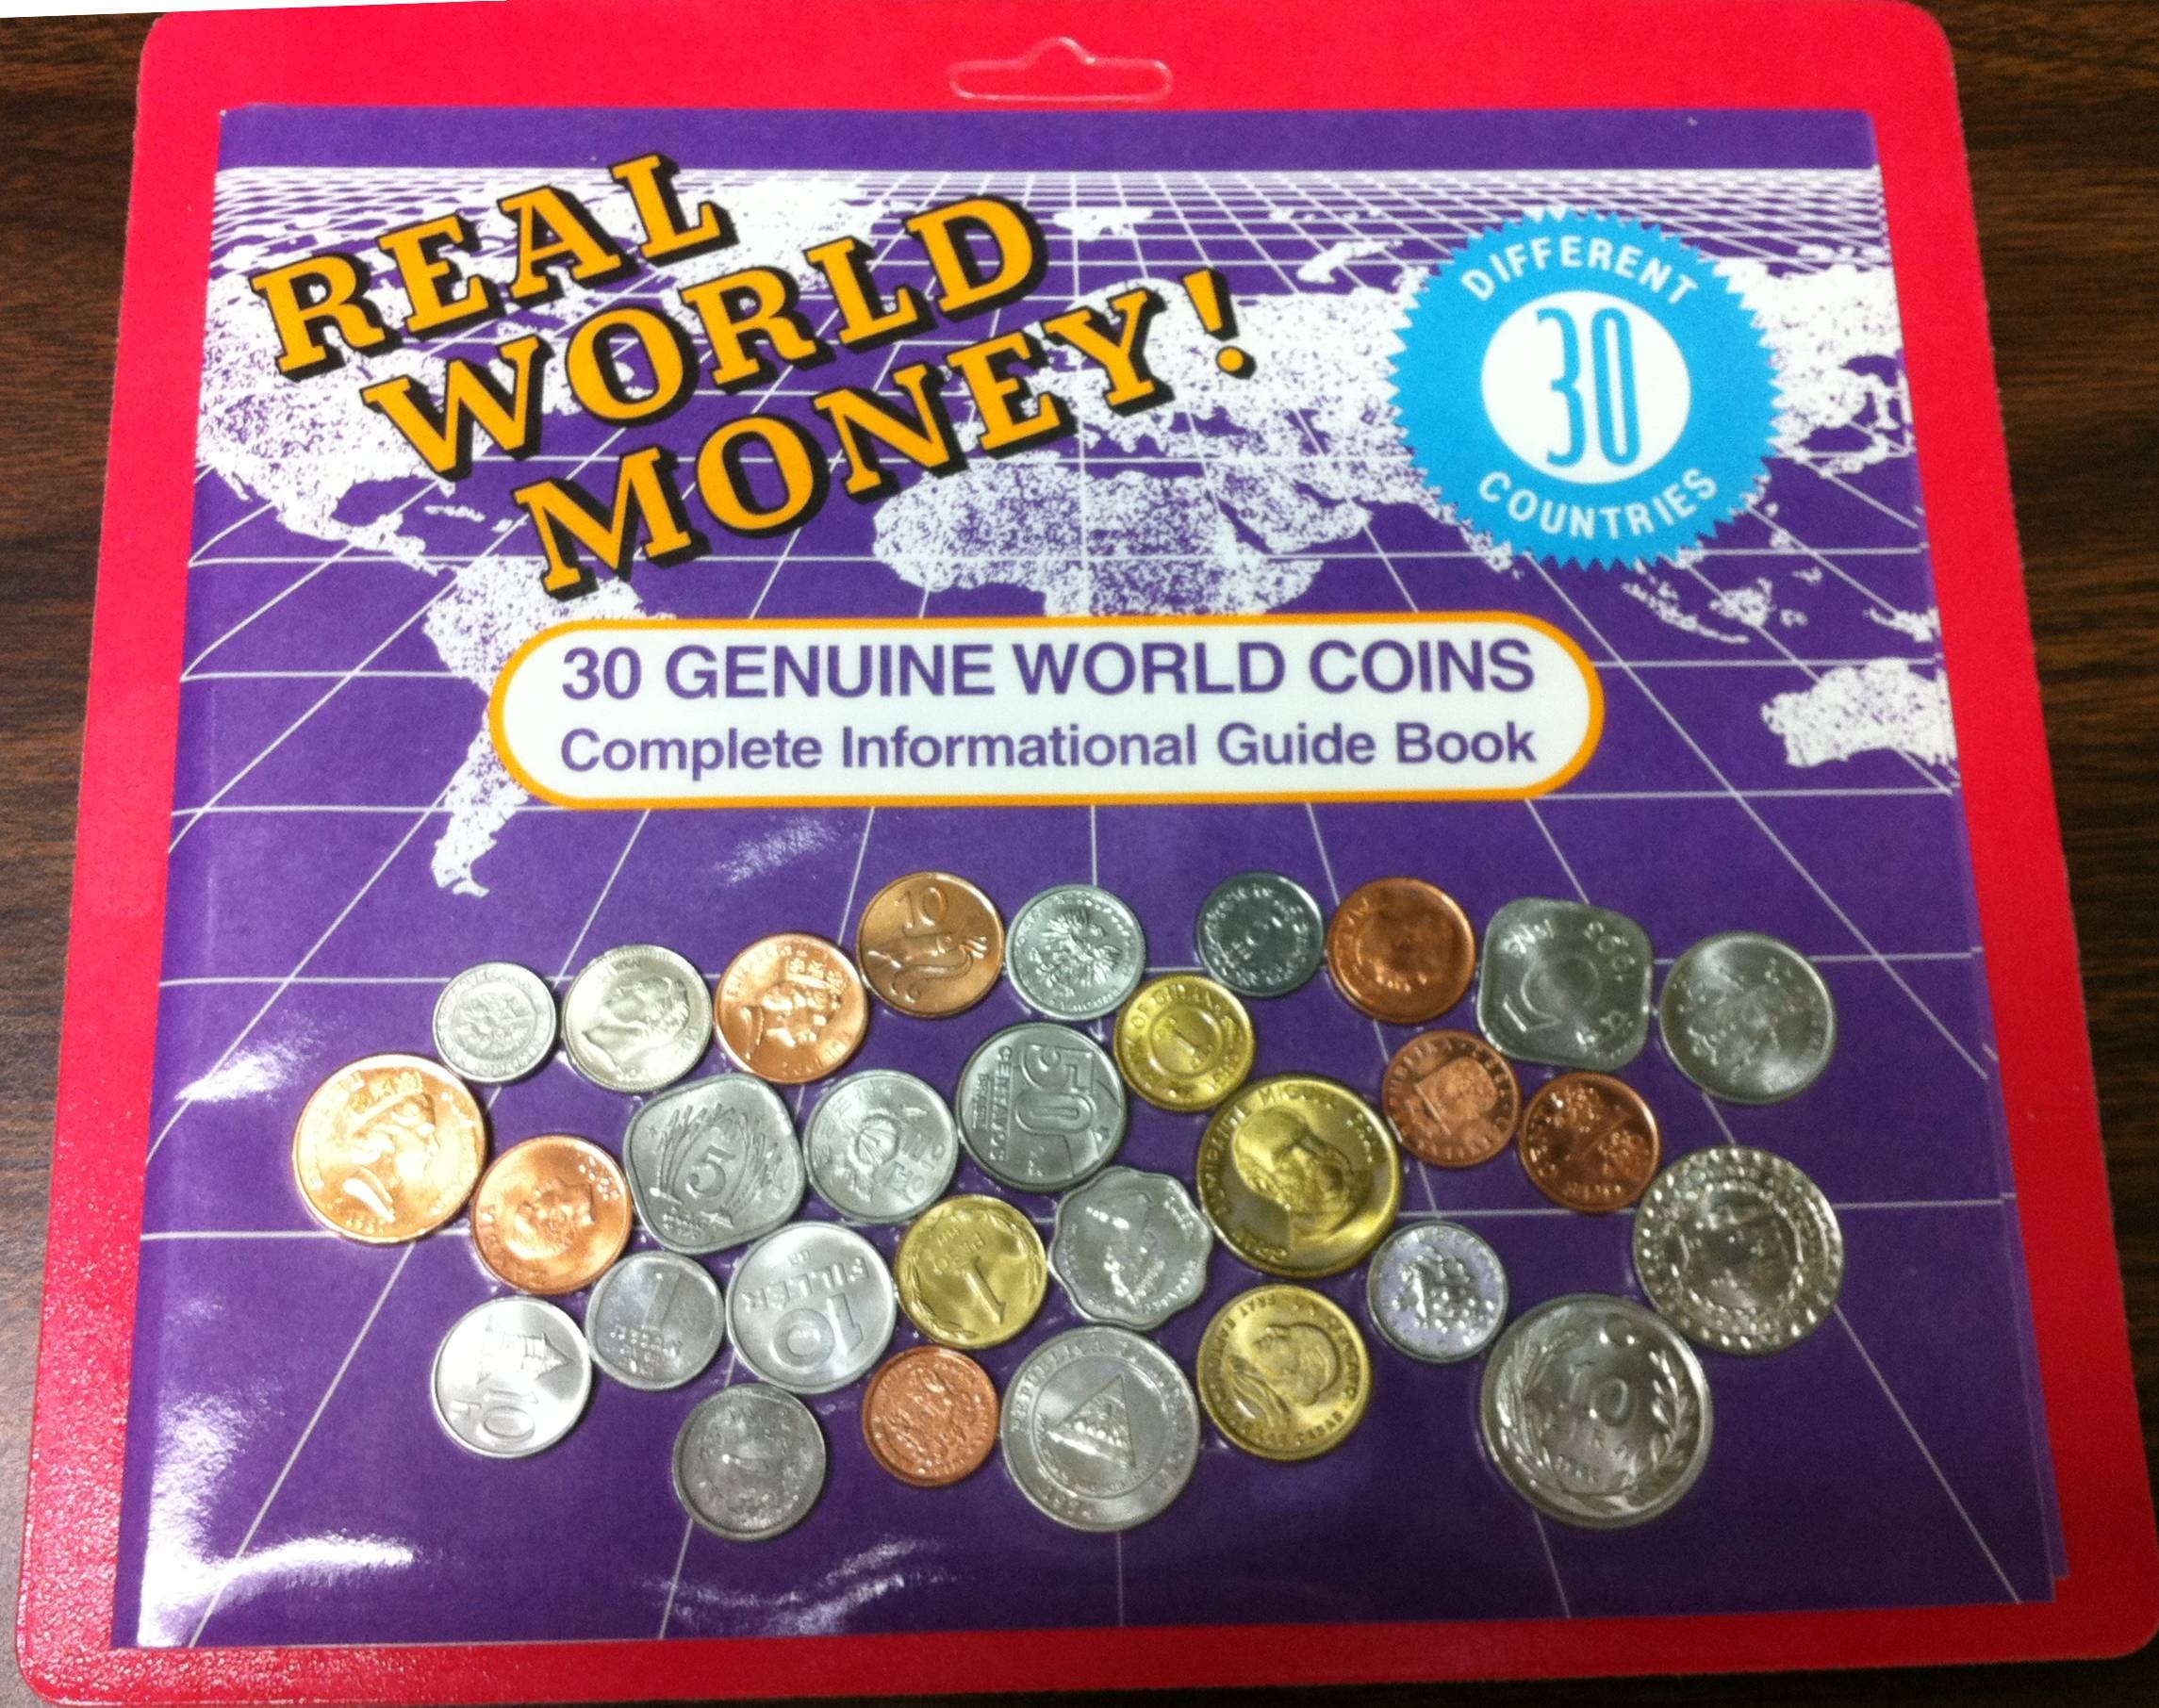 World Coins Collection from 30 Different Countries